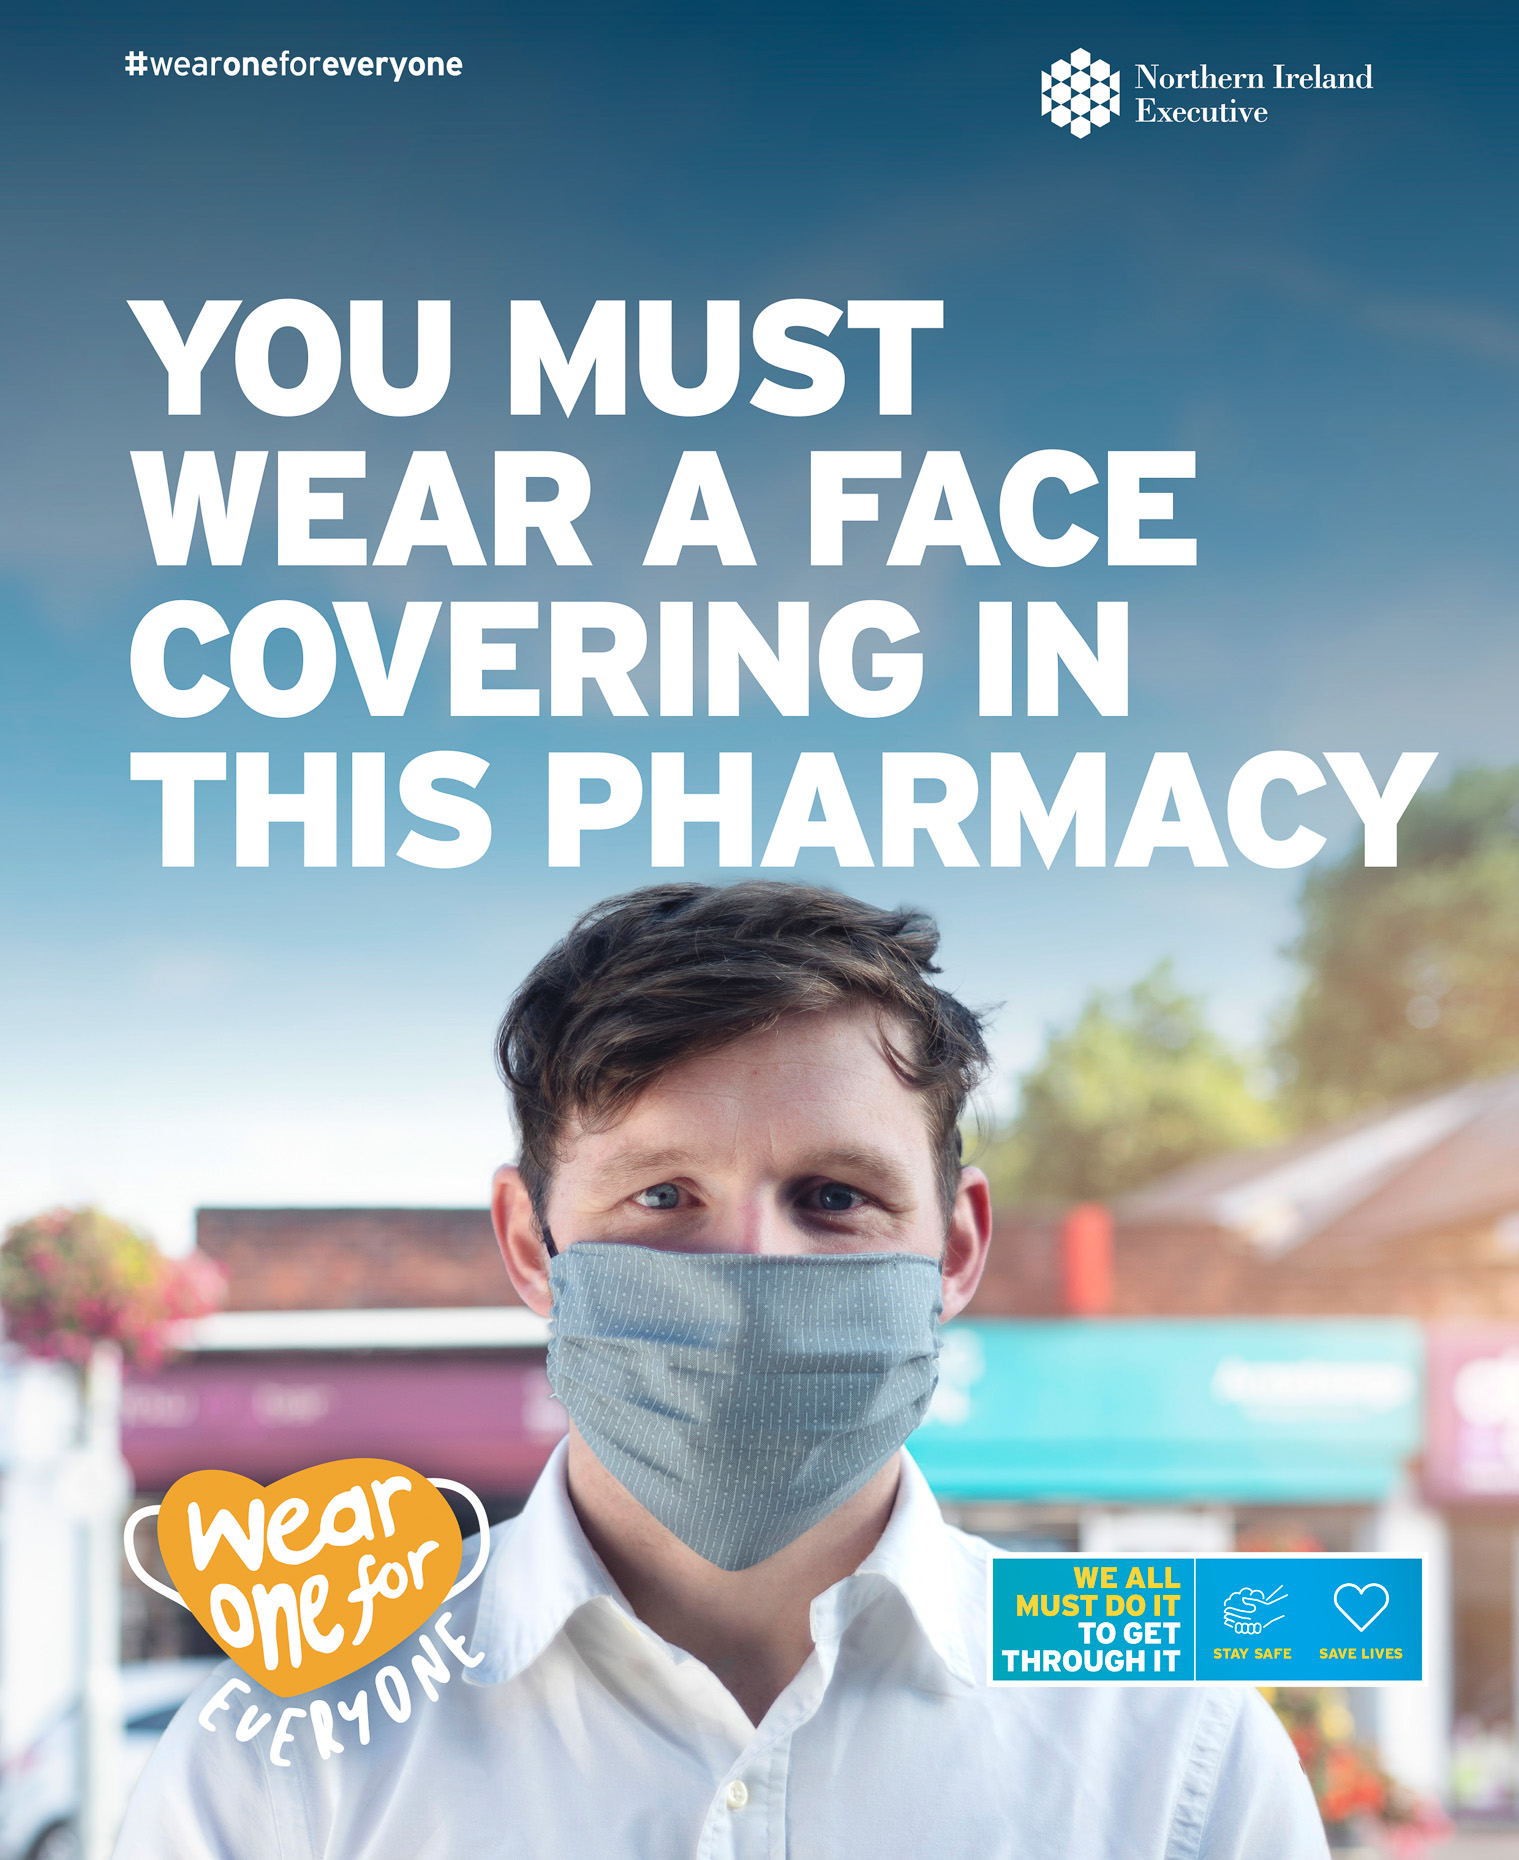 You must wear a face covering in this pharmacy.